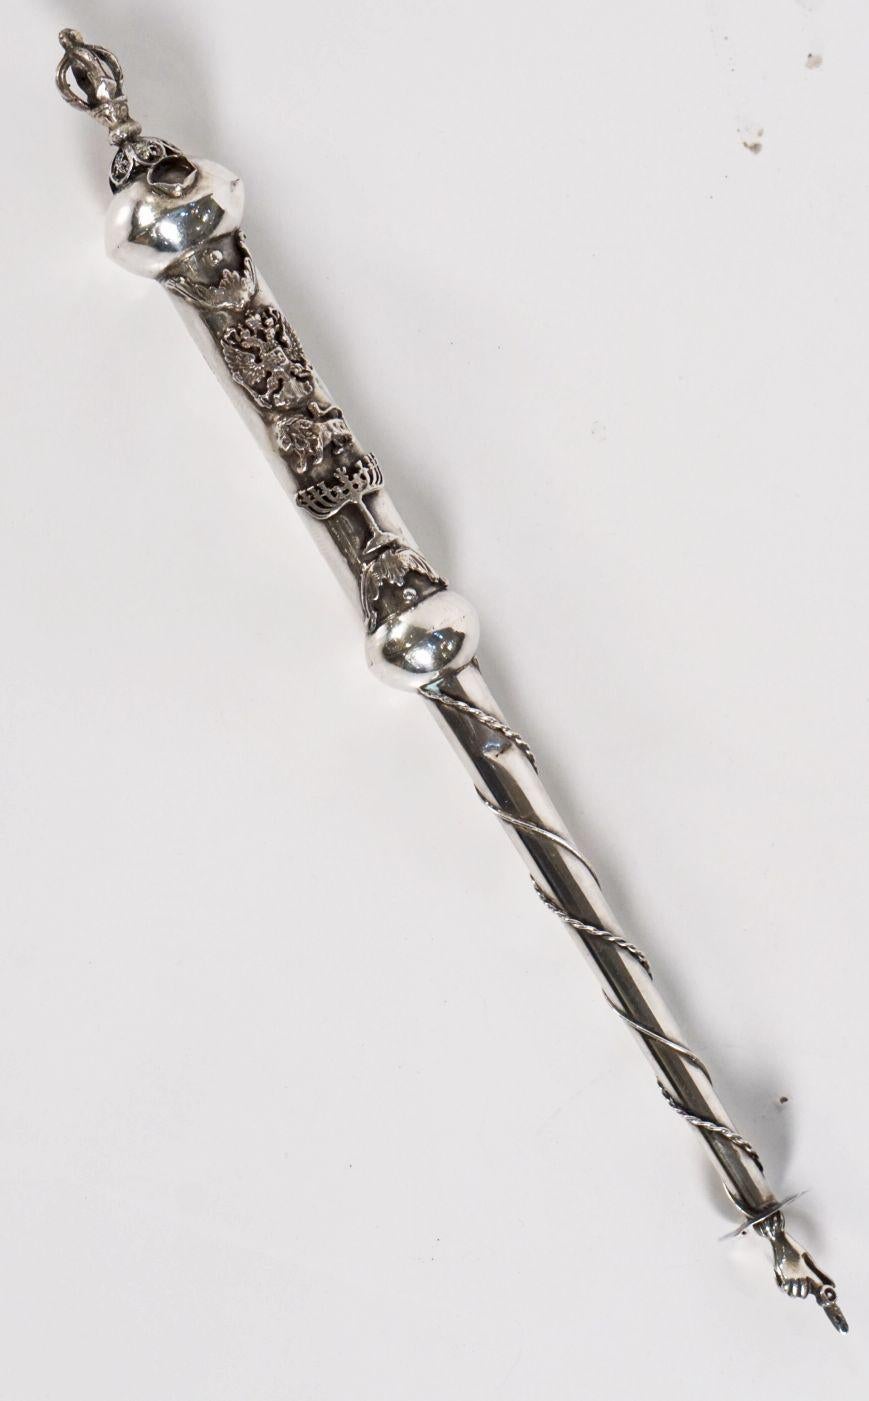 A fine Jewish yad or torah pointer of silver featuring a crown on the handle end, with a traditional pointed finger hand on the other end. With decorative symbols including a menorah and lion on the handle. A handsome find for the Judaica